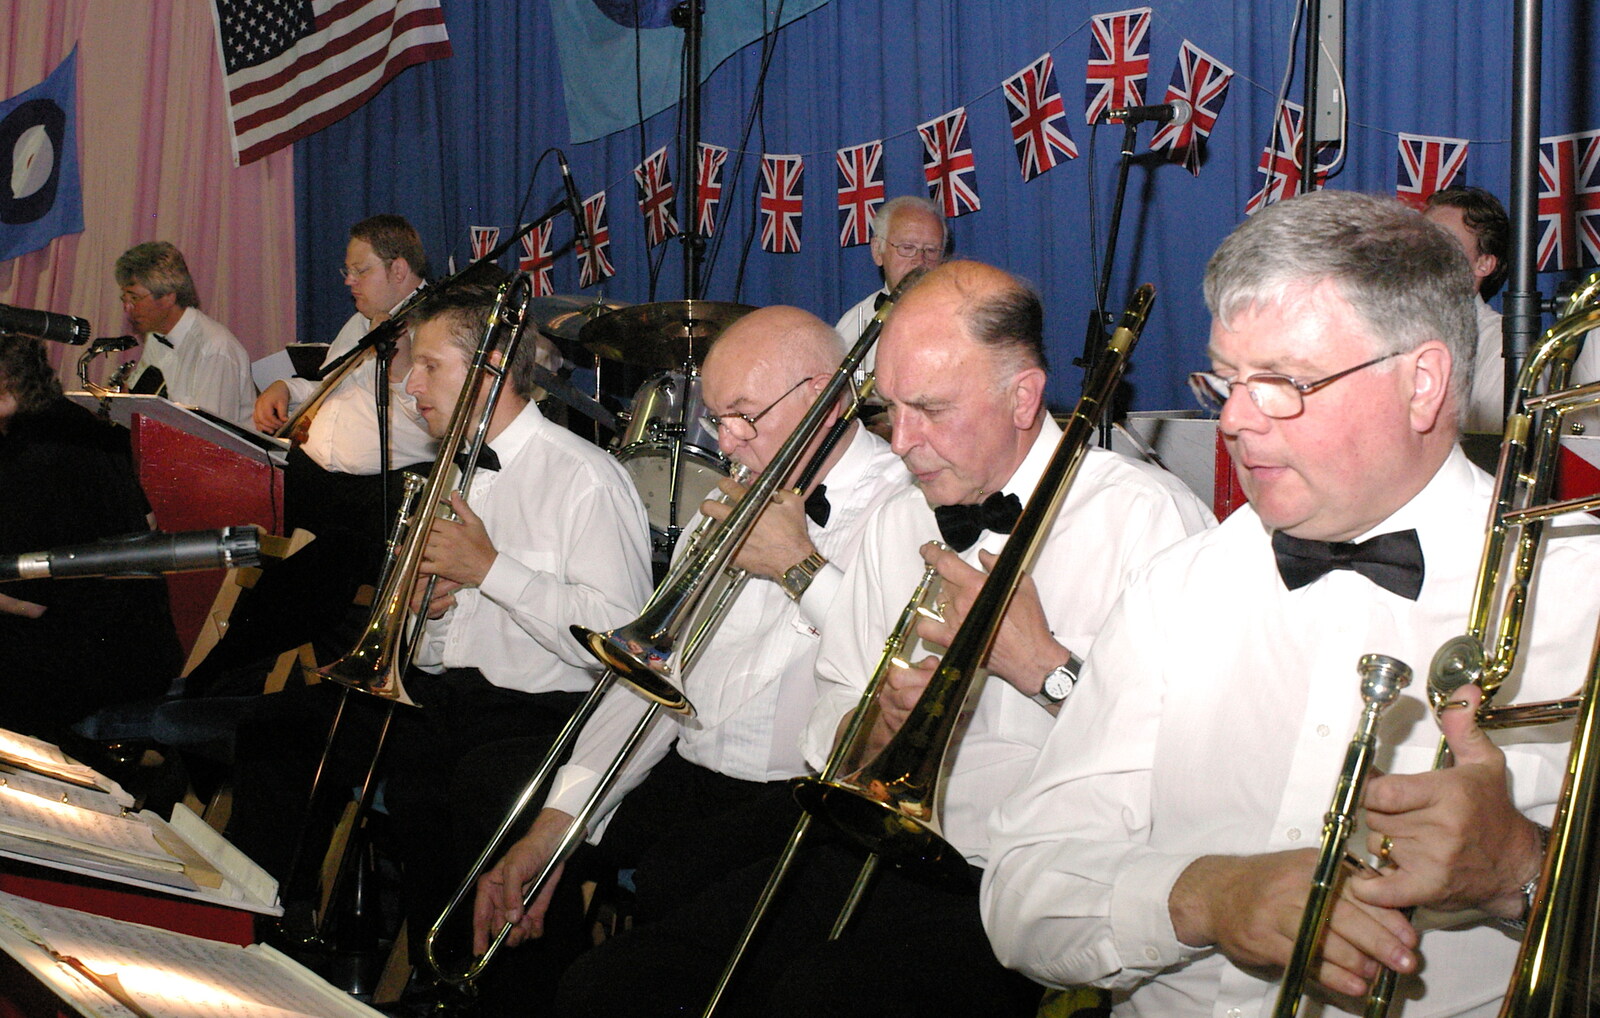 The trombones from Another 1940s Dance, Ellough Airfield, Beccles, Suffolk - 24th June 2005